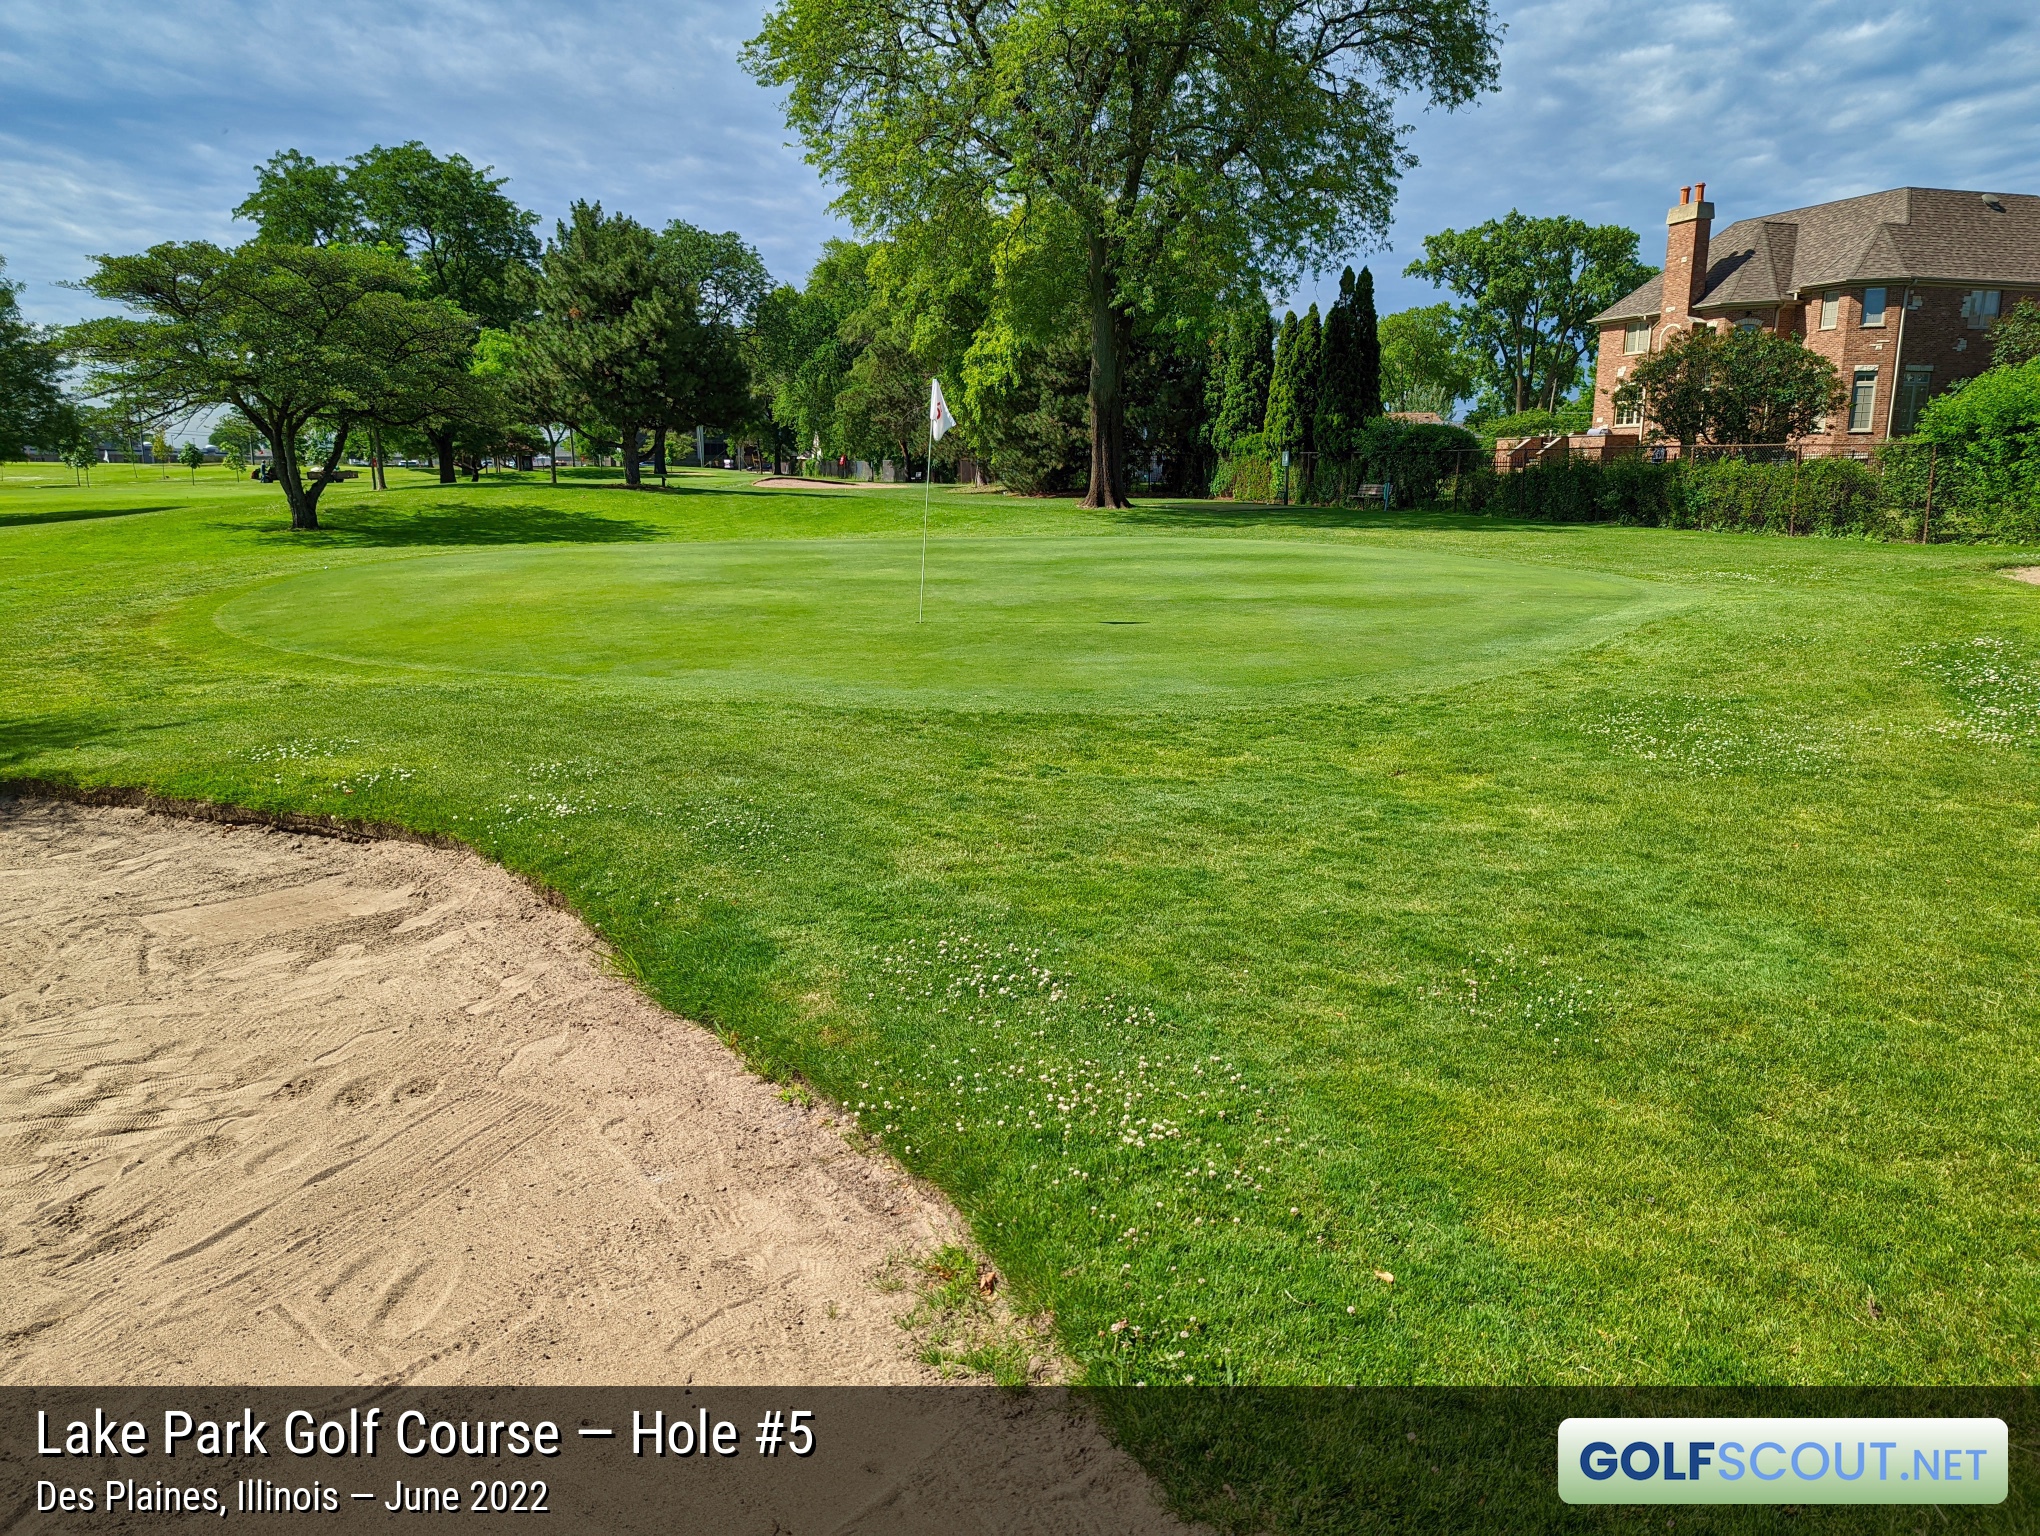 Photo of hole #5 at Lake Park Golf Course in Des Plaines, Illinois. 